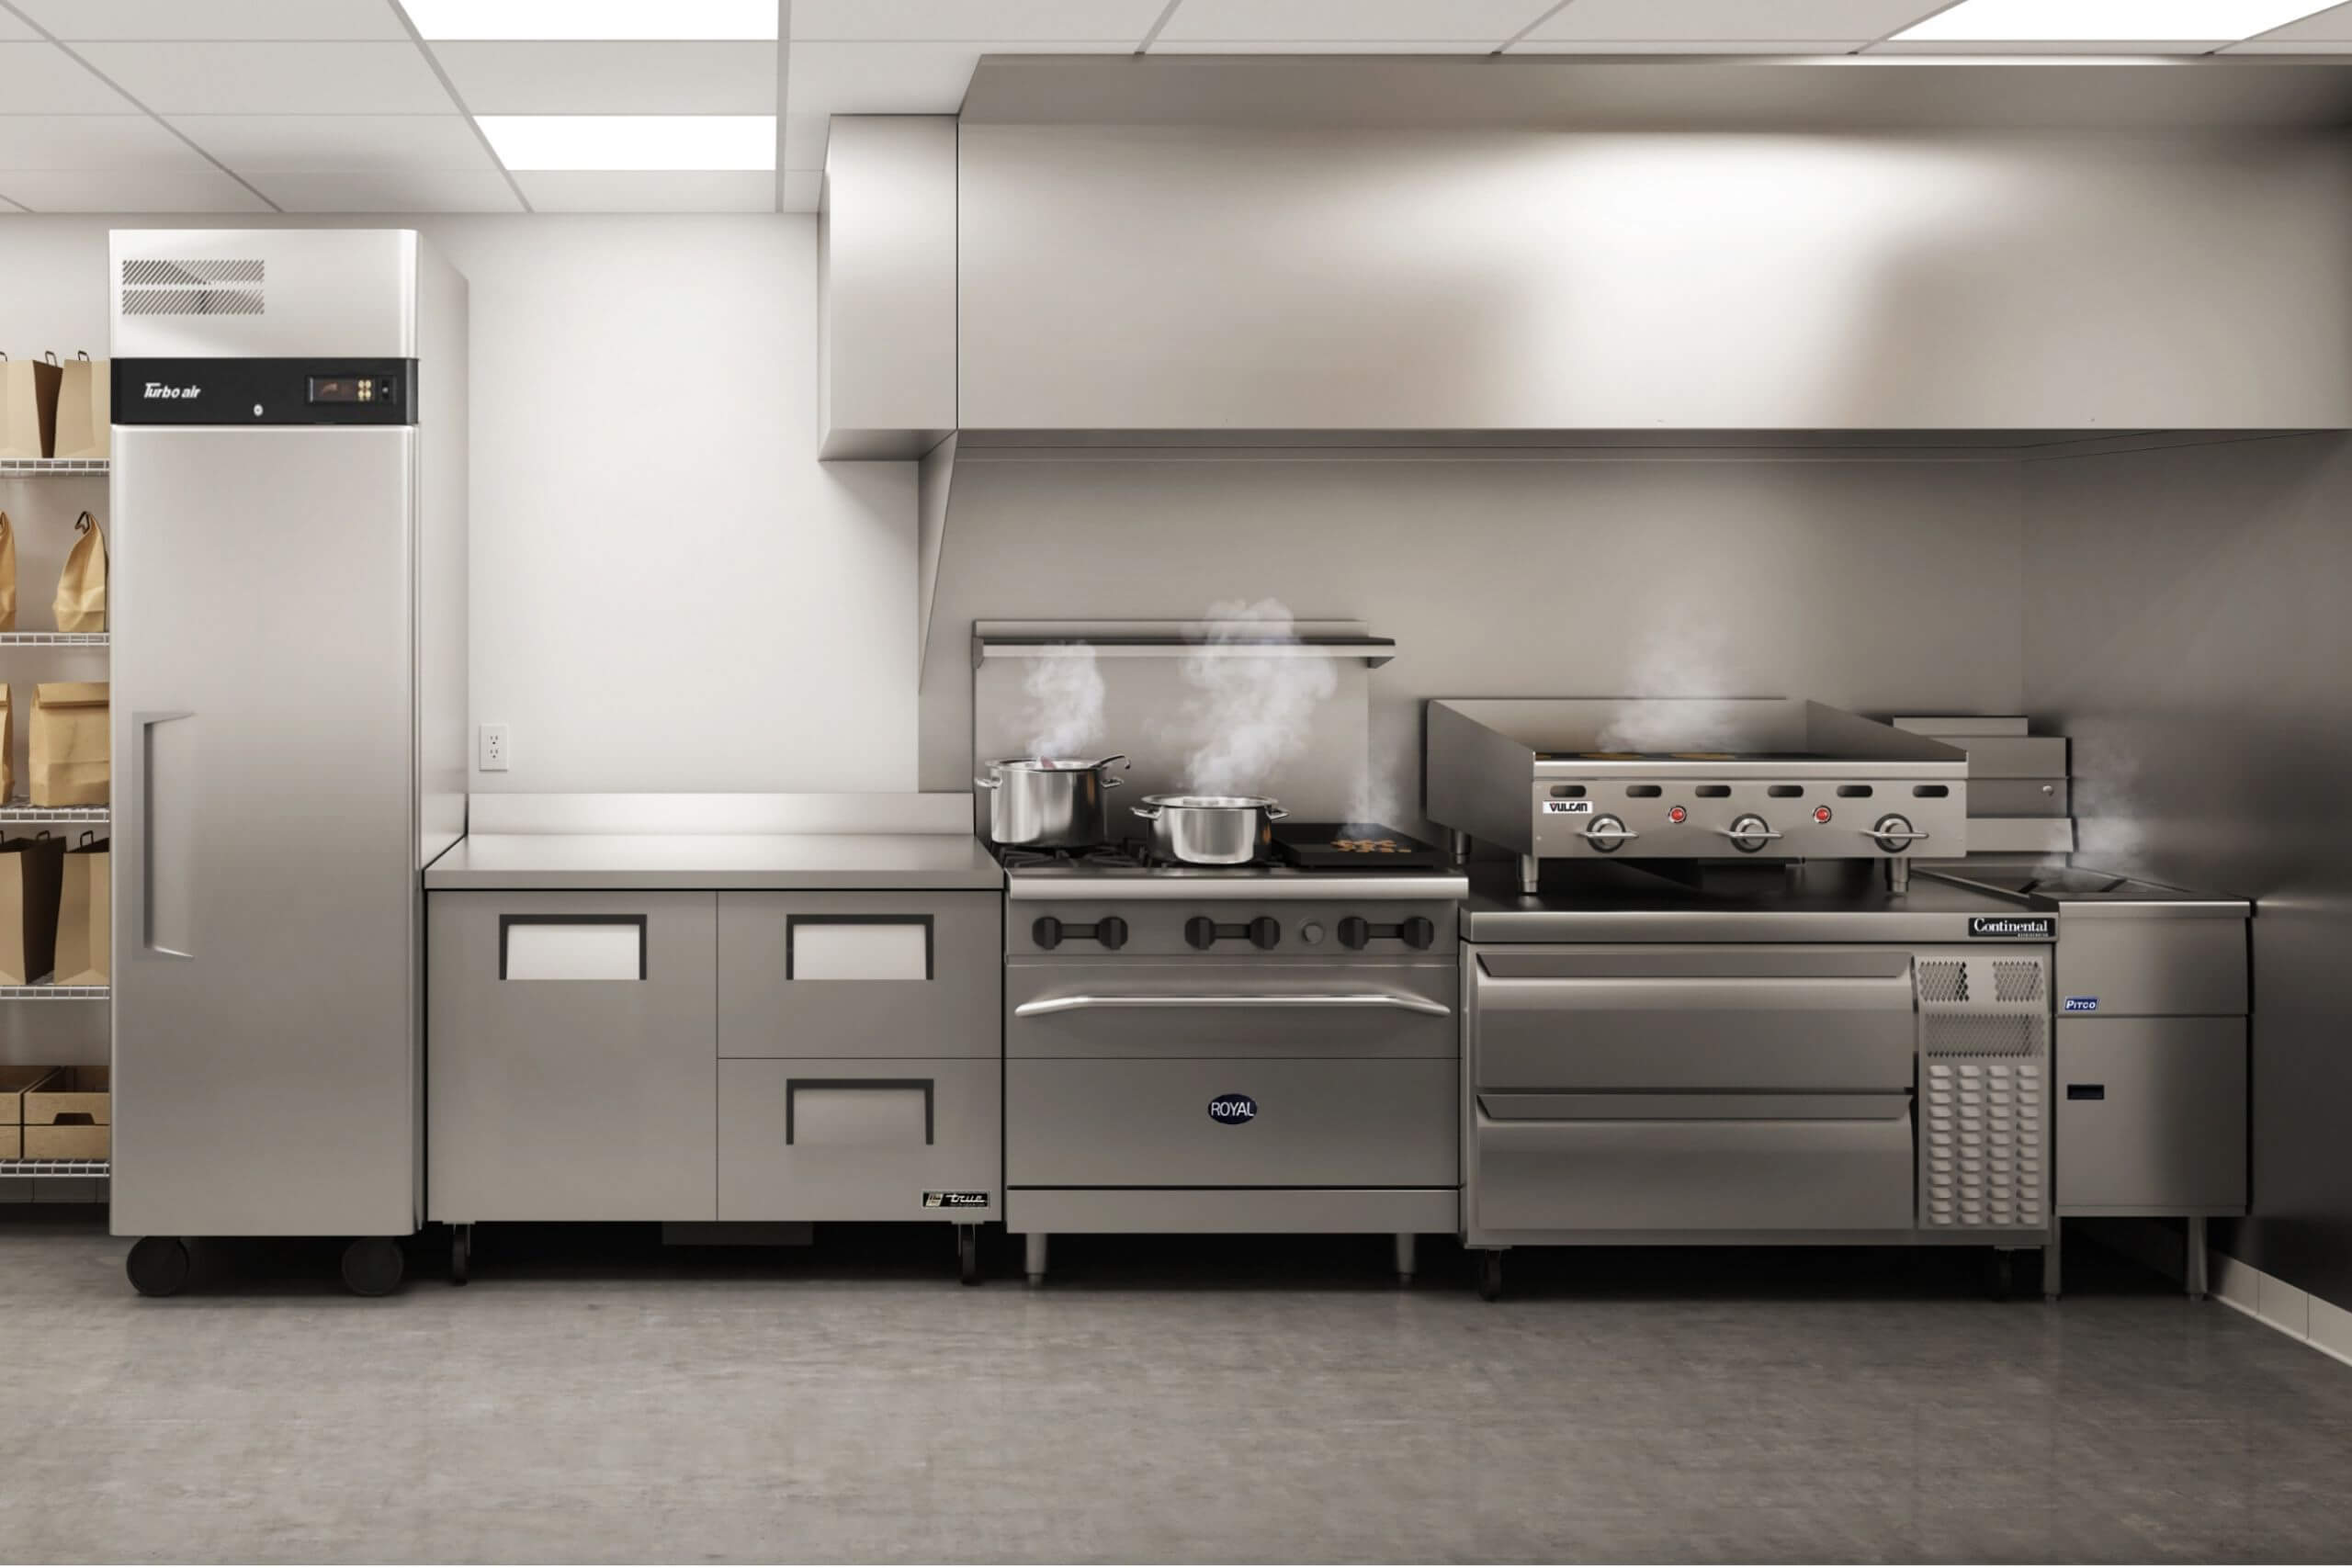 cloud-kitchen-spaces-turnkey-solutions-quick-setup-time